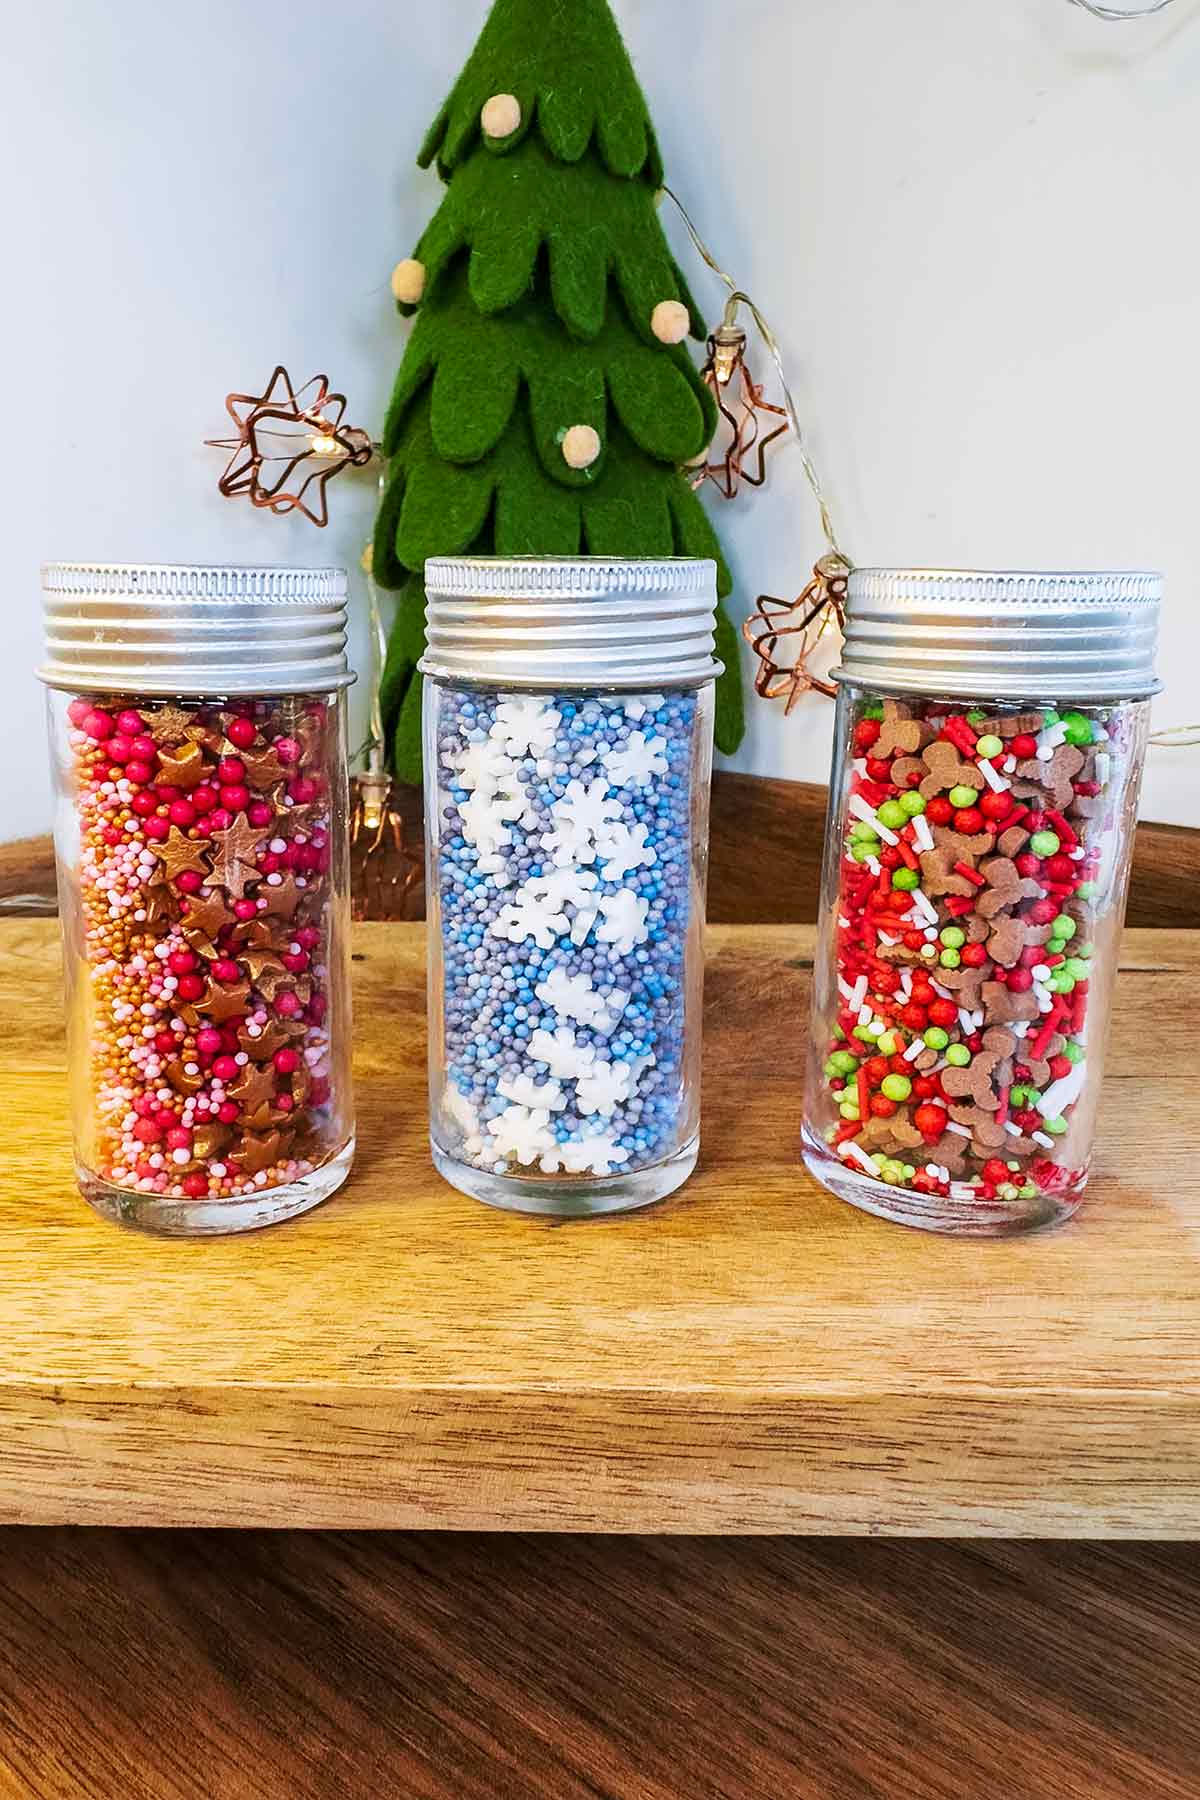 Three jars of sugar sprinkles in front of a small felt Christmas tree.